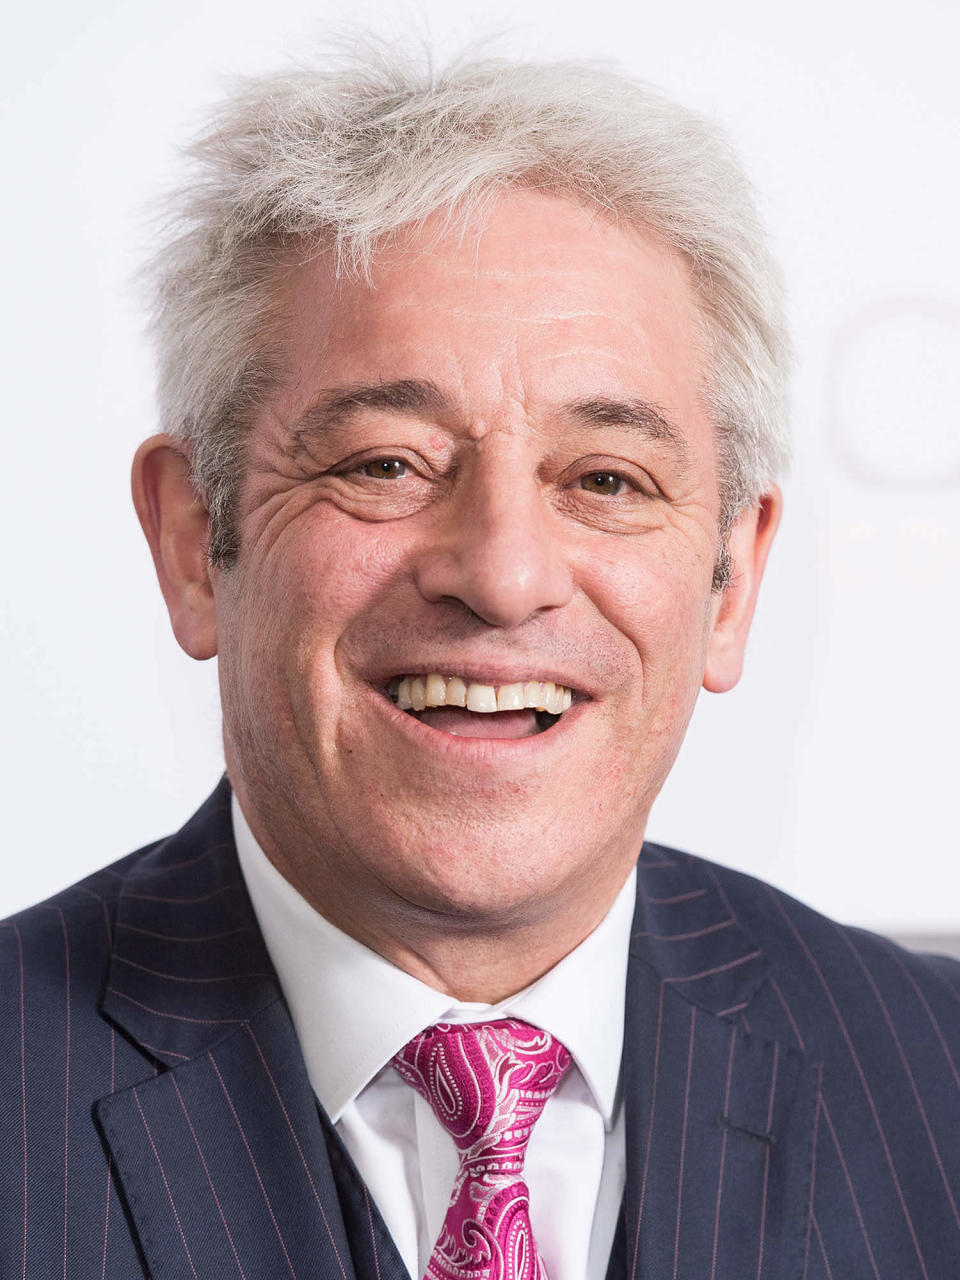 John Bercow (Jeff Spicer / Getty Images)